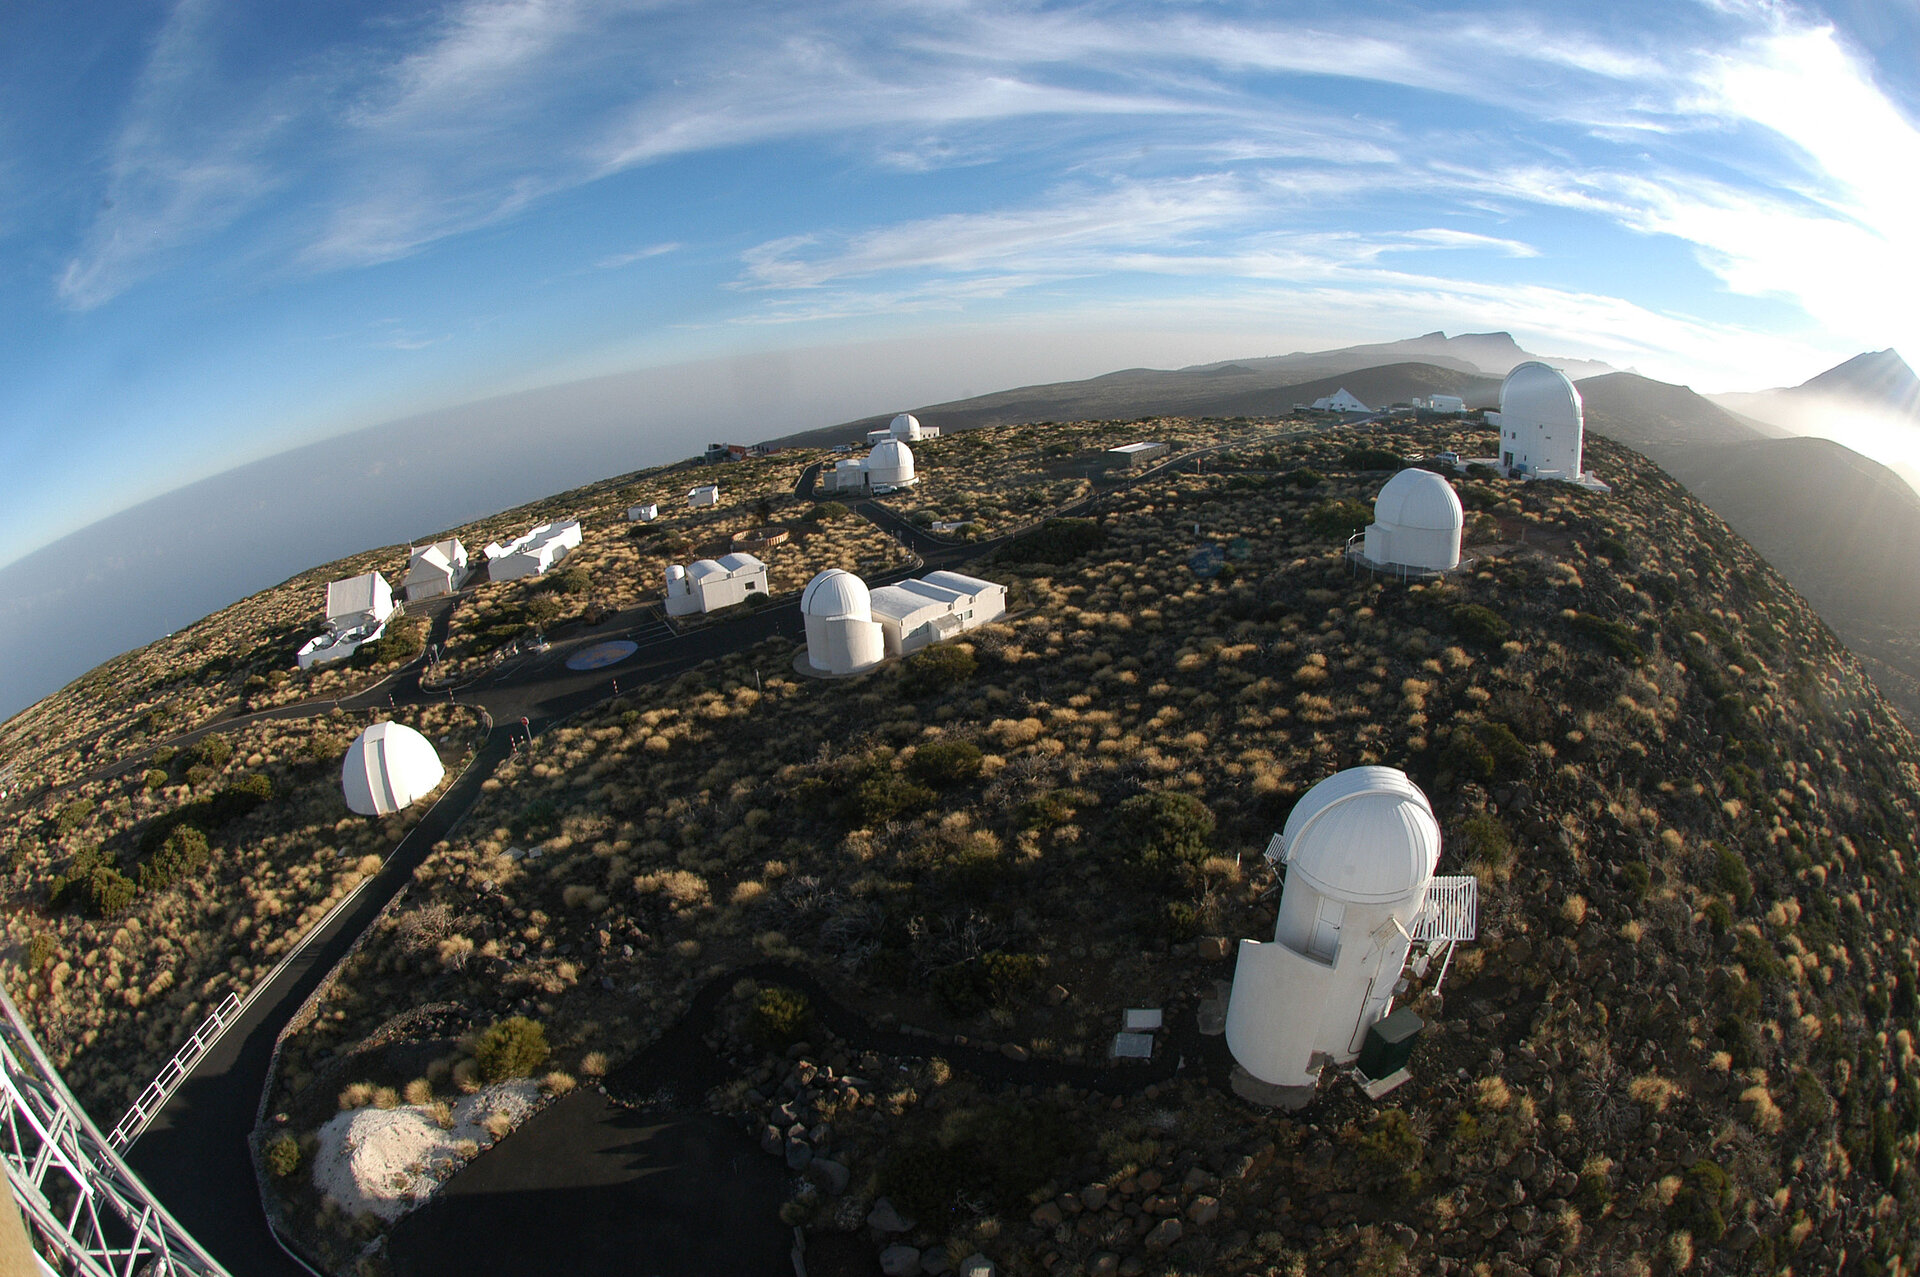 ESA's Optical Ground Station is located at the Teide Observatory, Tenerife